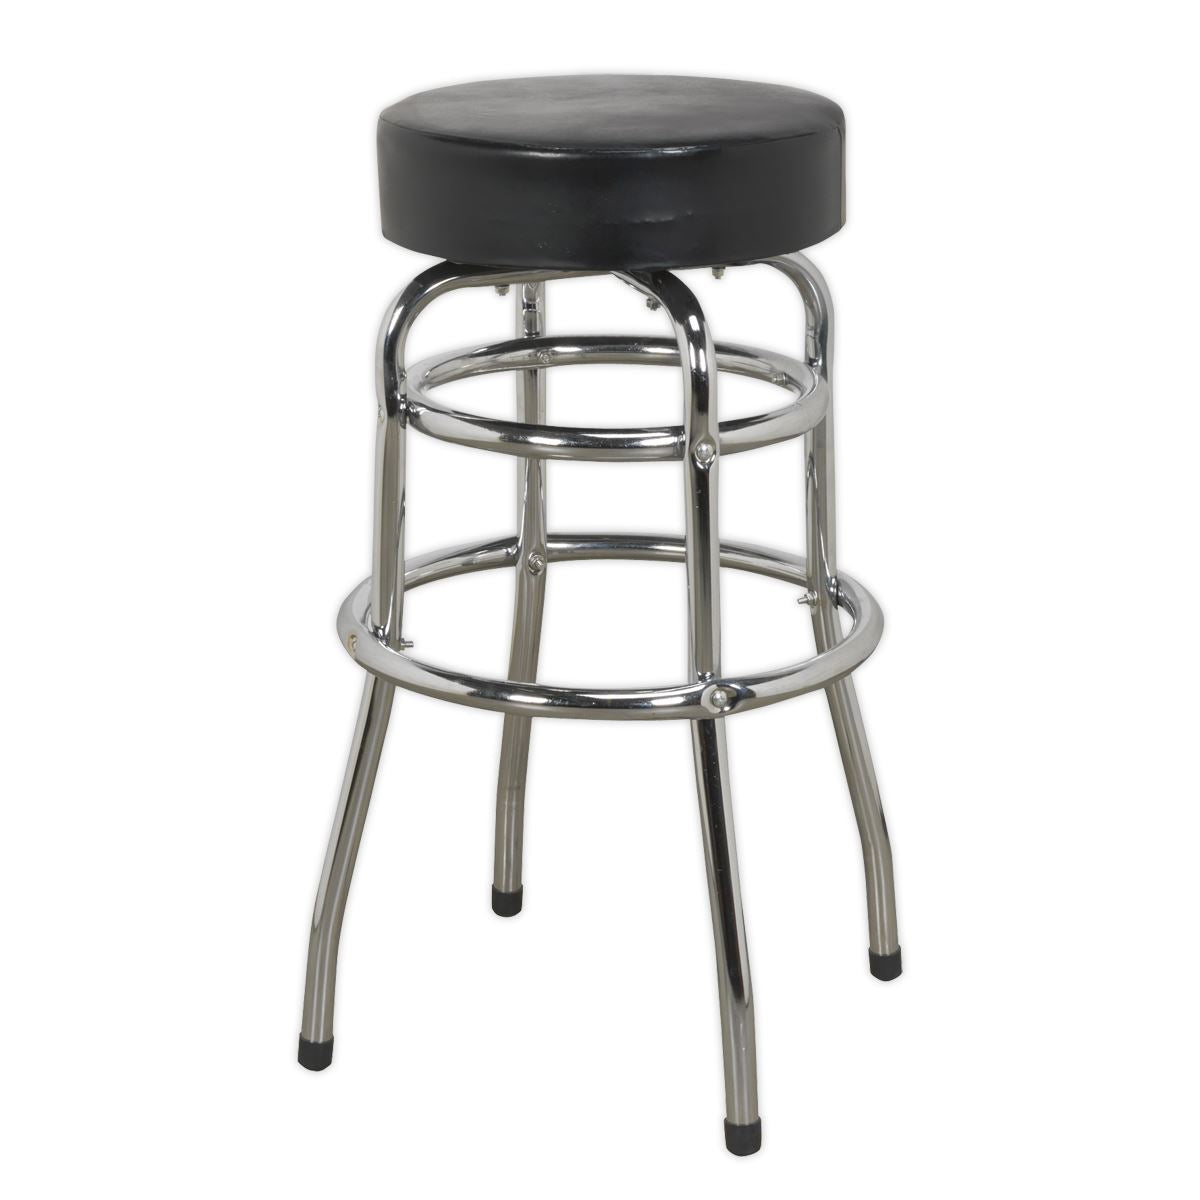 Sealey Workshop Stool with Swivel Seat SCR13